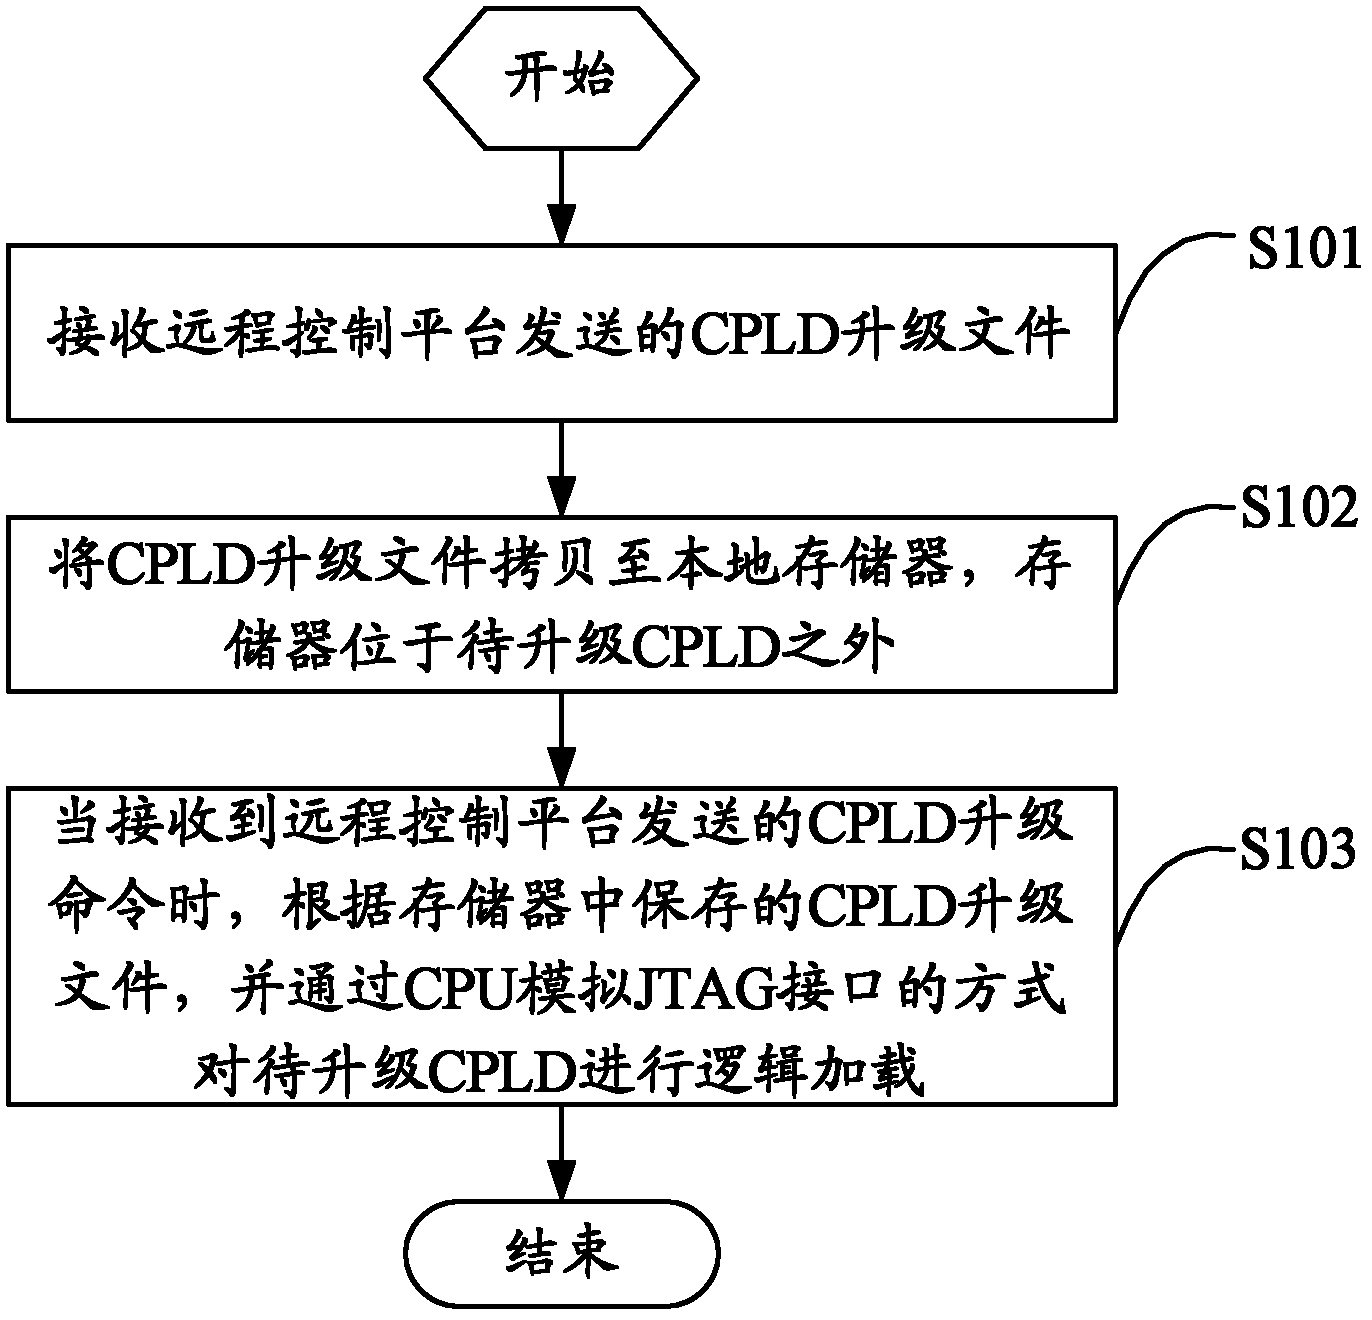 Online CPLD (Complex Programmable Logic Devices) upgrading method, device and business veneer